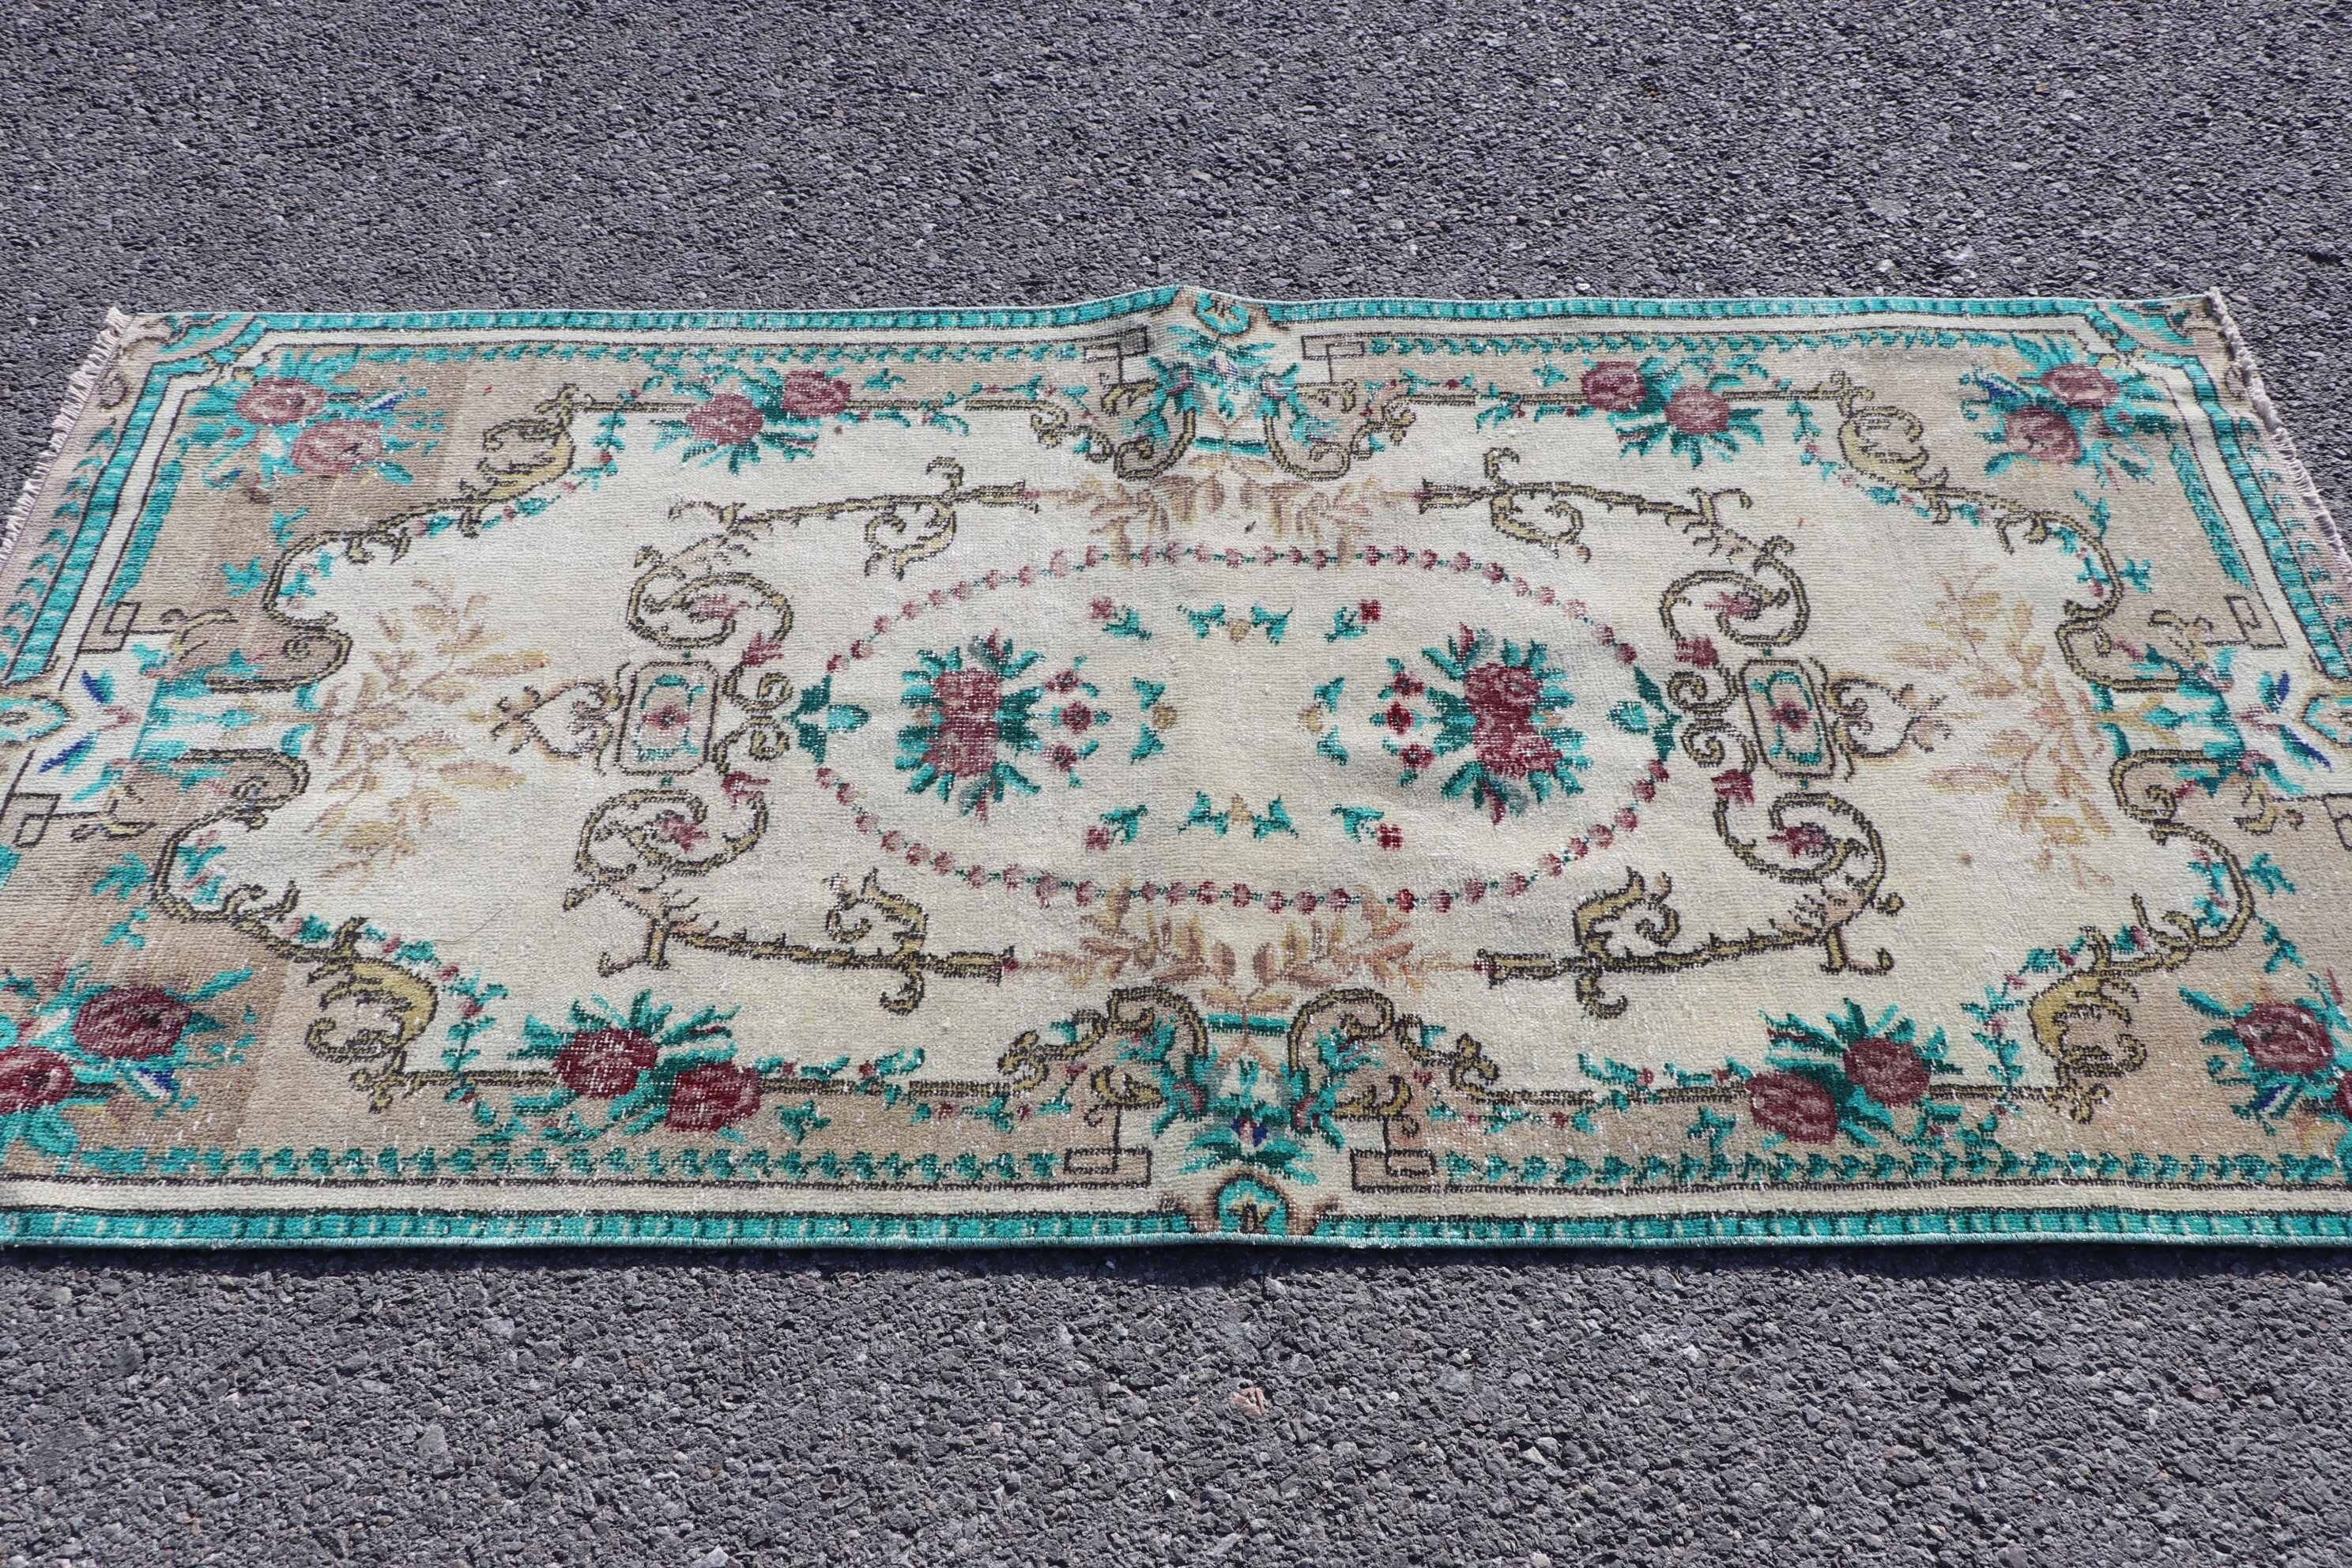 Rugs for Kitchen, Floor Rug, Entry Rug, Turkish Rug, Bedroom Rugs, Office Rugs, 3.1x6.8 ft Accent Rugs, Blue Antique Rug, Vintage Rugs